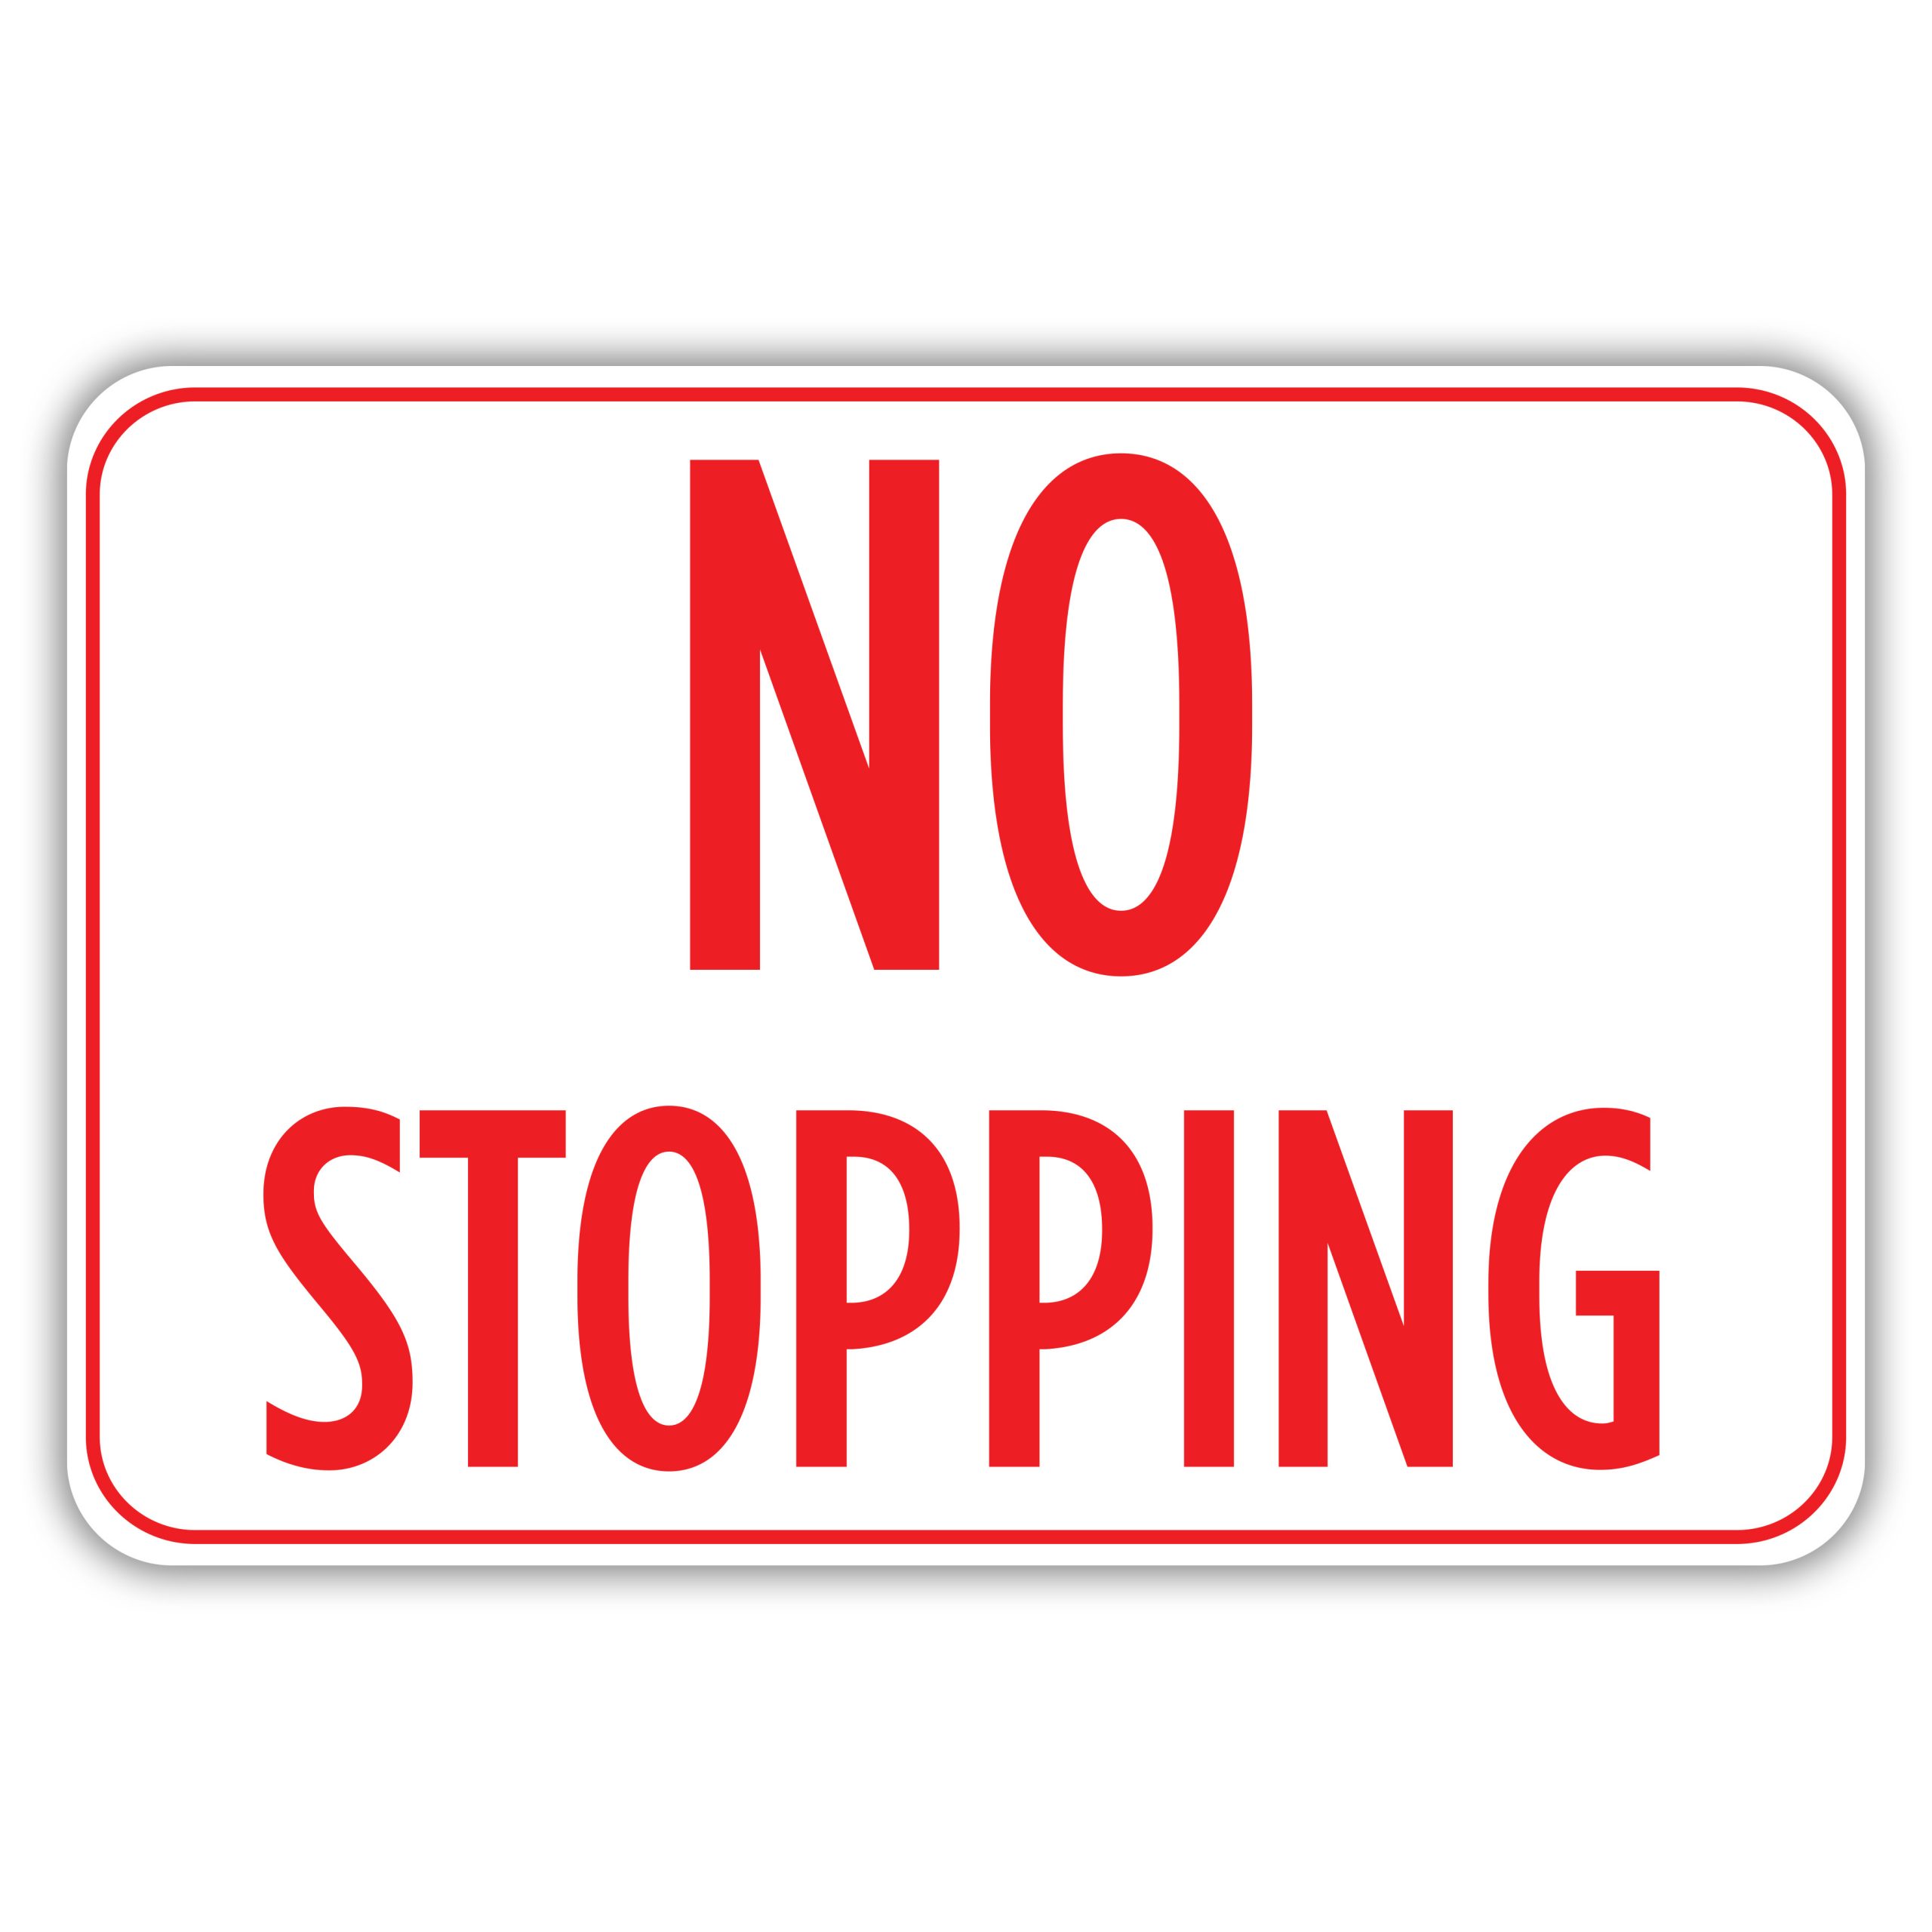 no-stopping-american-sign-company